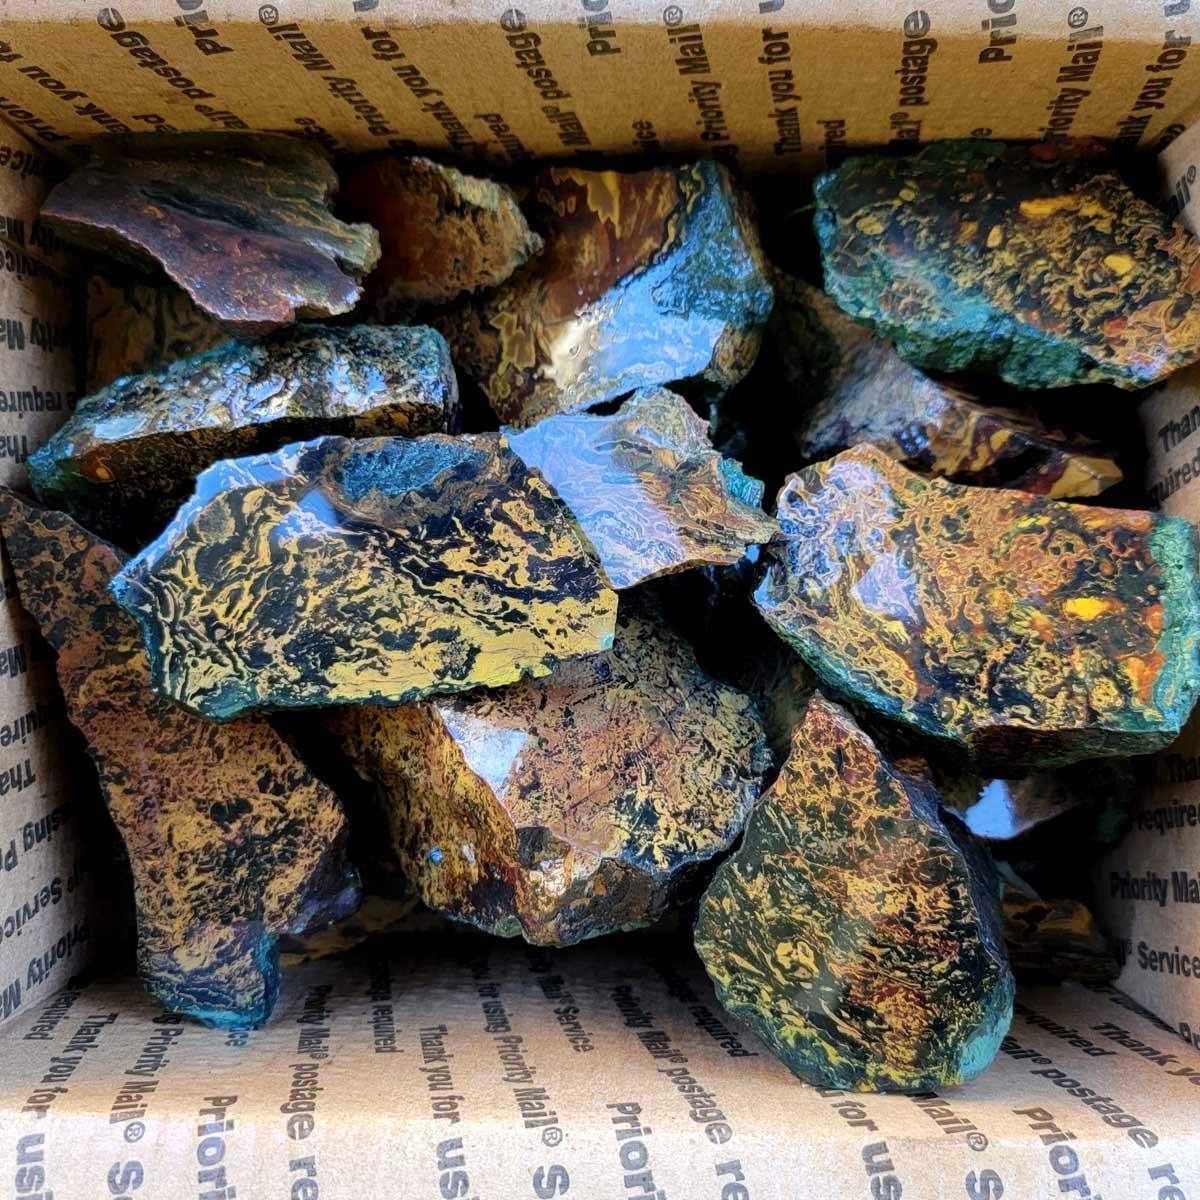 Overflowing High Grade Cut and Proven Kaleidoscope Jasper Flatrate! 24.5 lbs! - LapidaryCentral